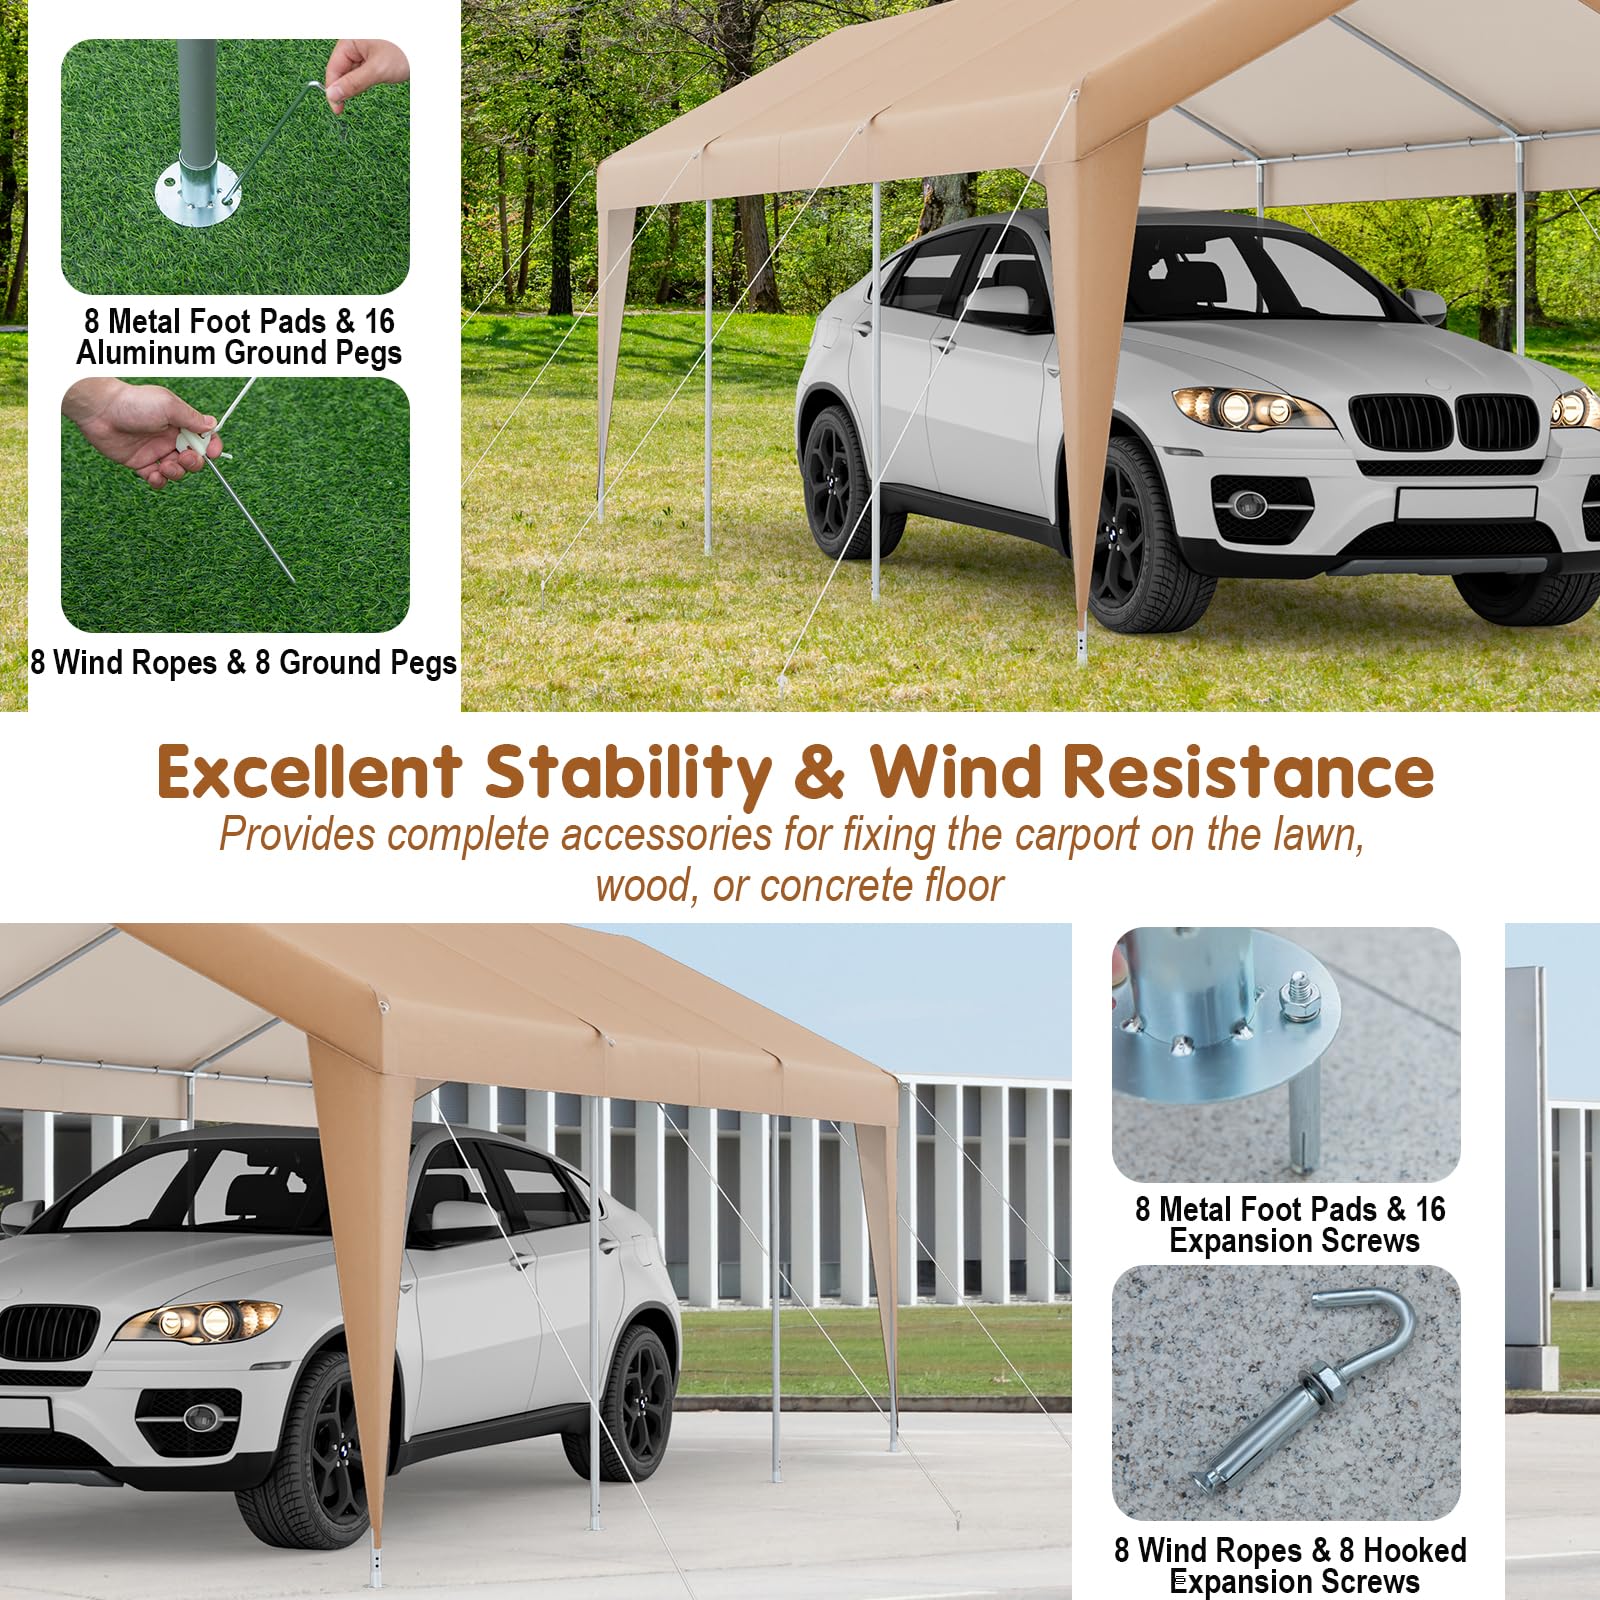 Ease2day 10 x 20 FT Heavy-Duty Steel Frame Carport Portable Garage Tent, All-Season Outdoor SUV Truck Car Canopy Boat Shelter Carports Ease2day